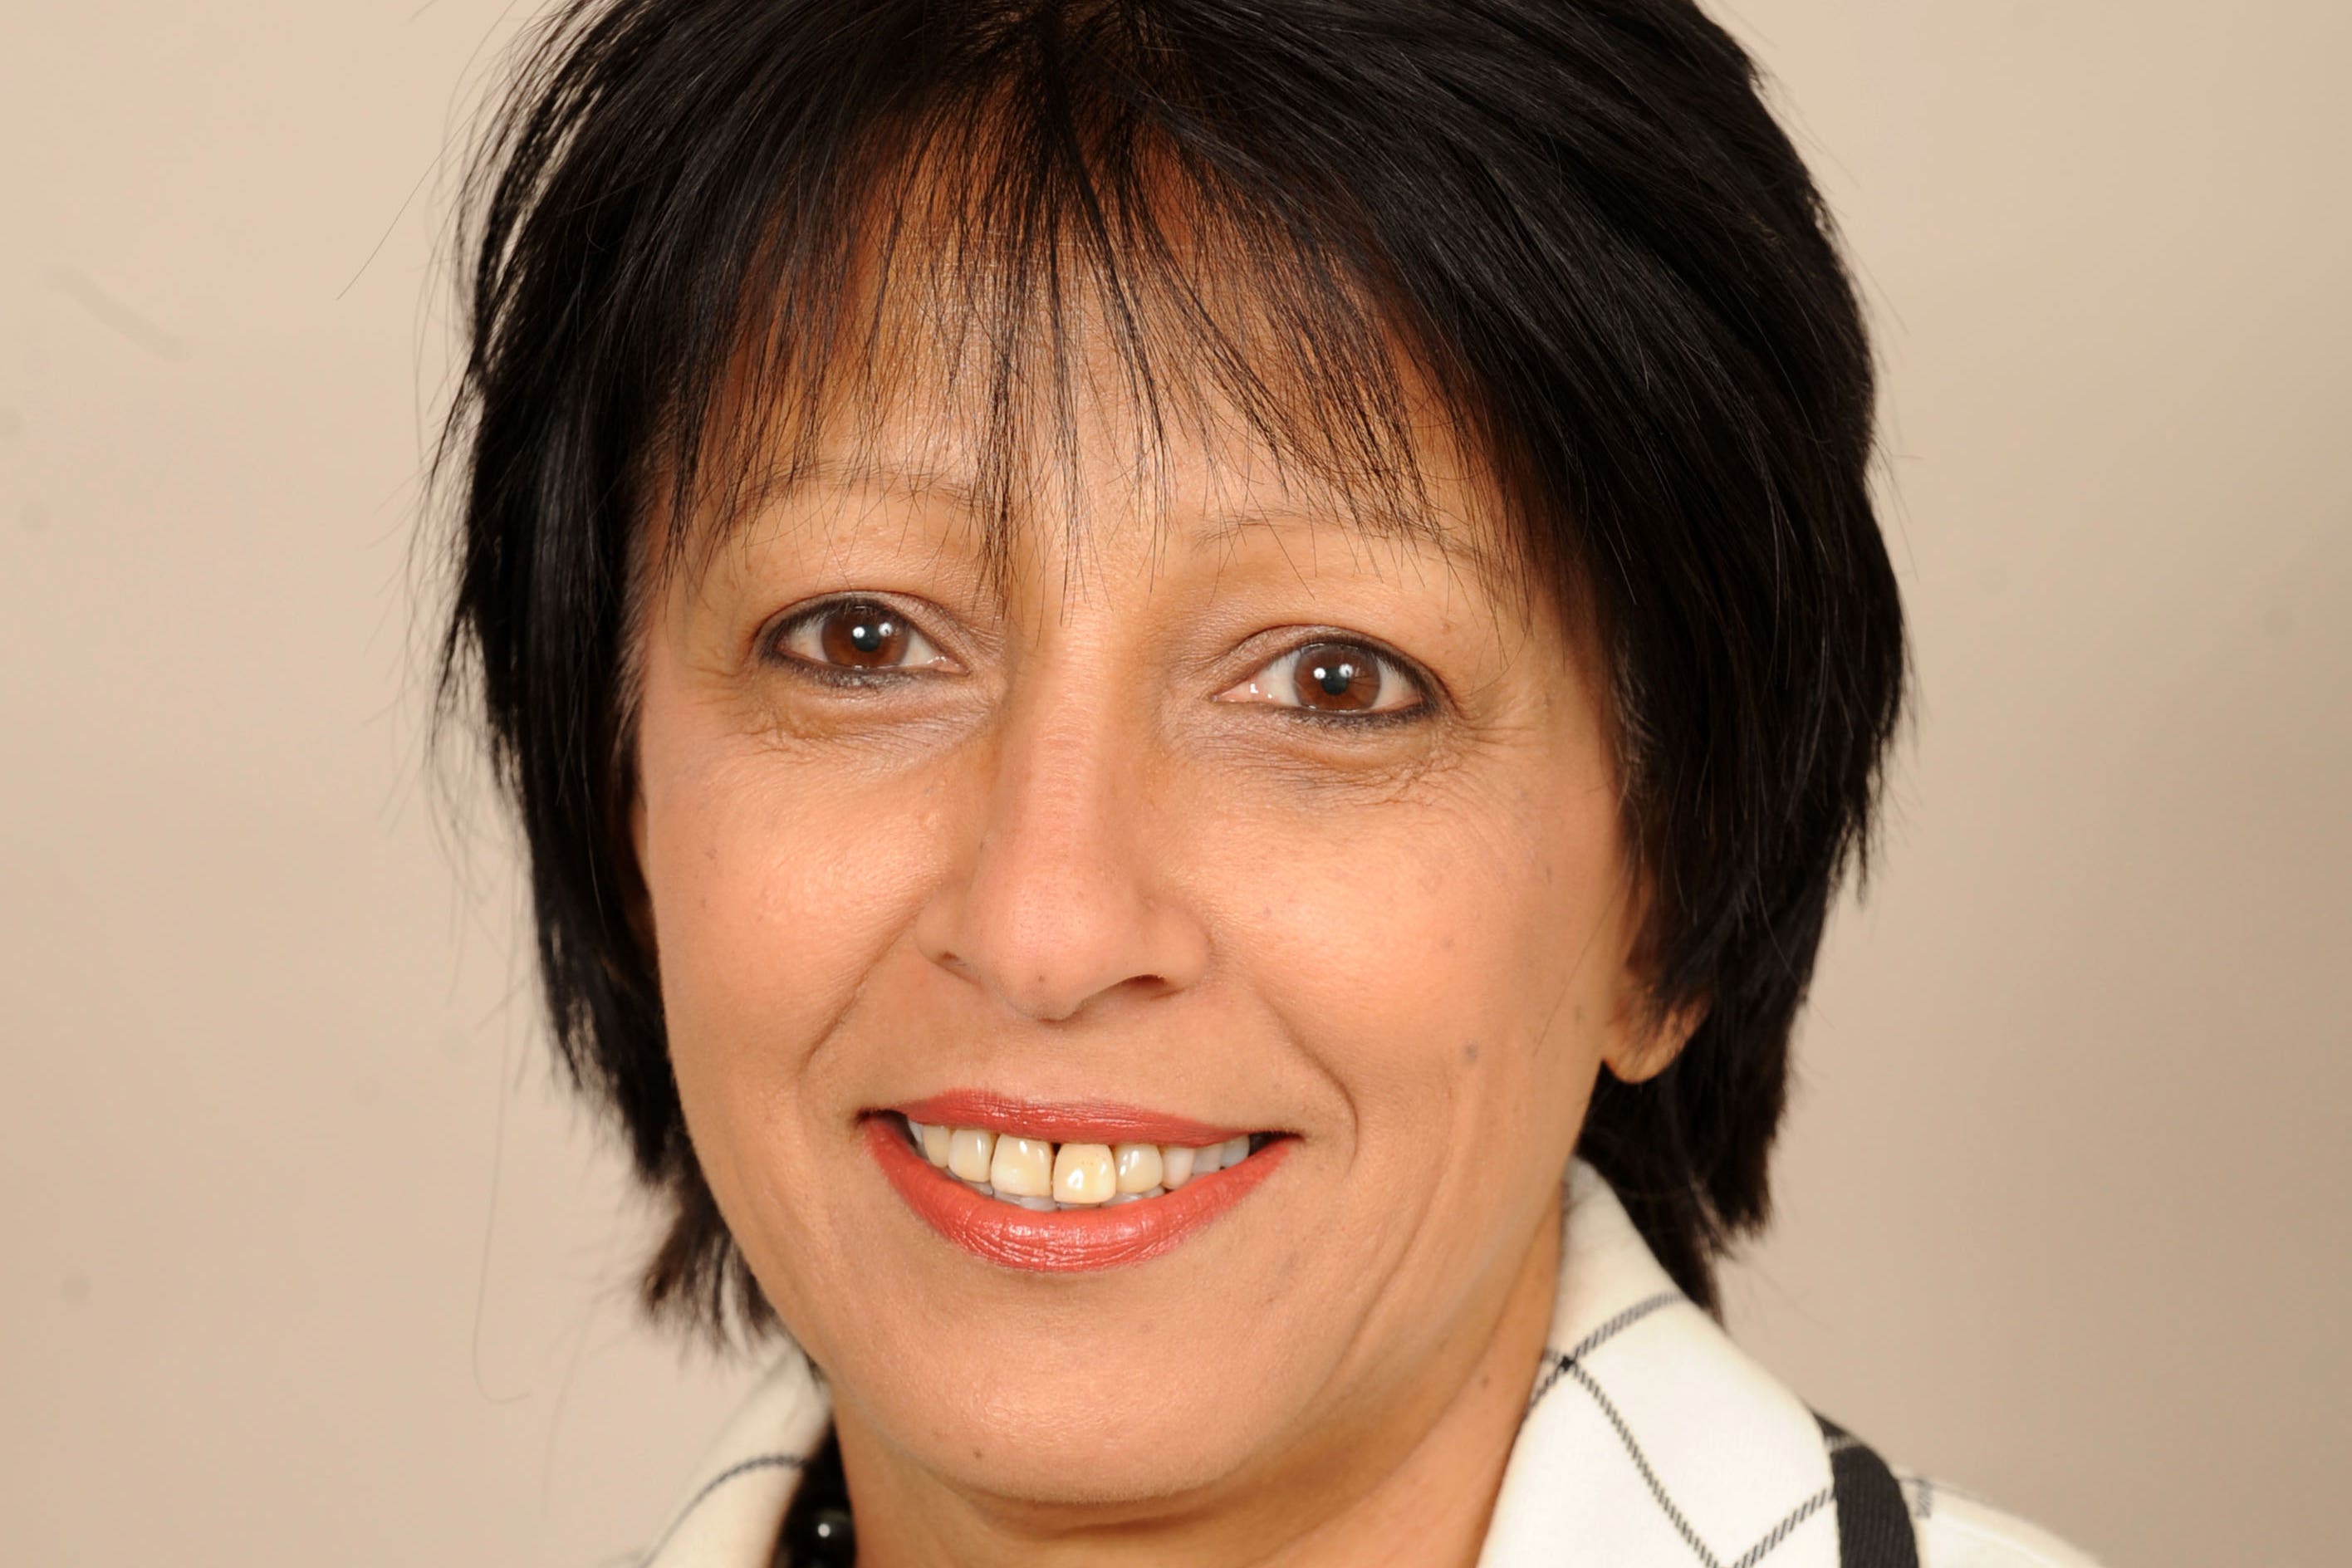 Equality and Human Rights Commission chair Baroness Kishwer Falkner